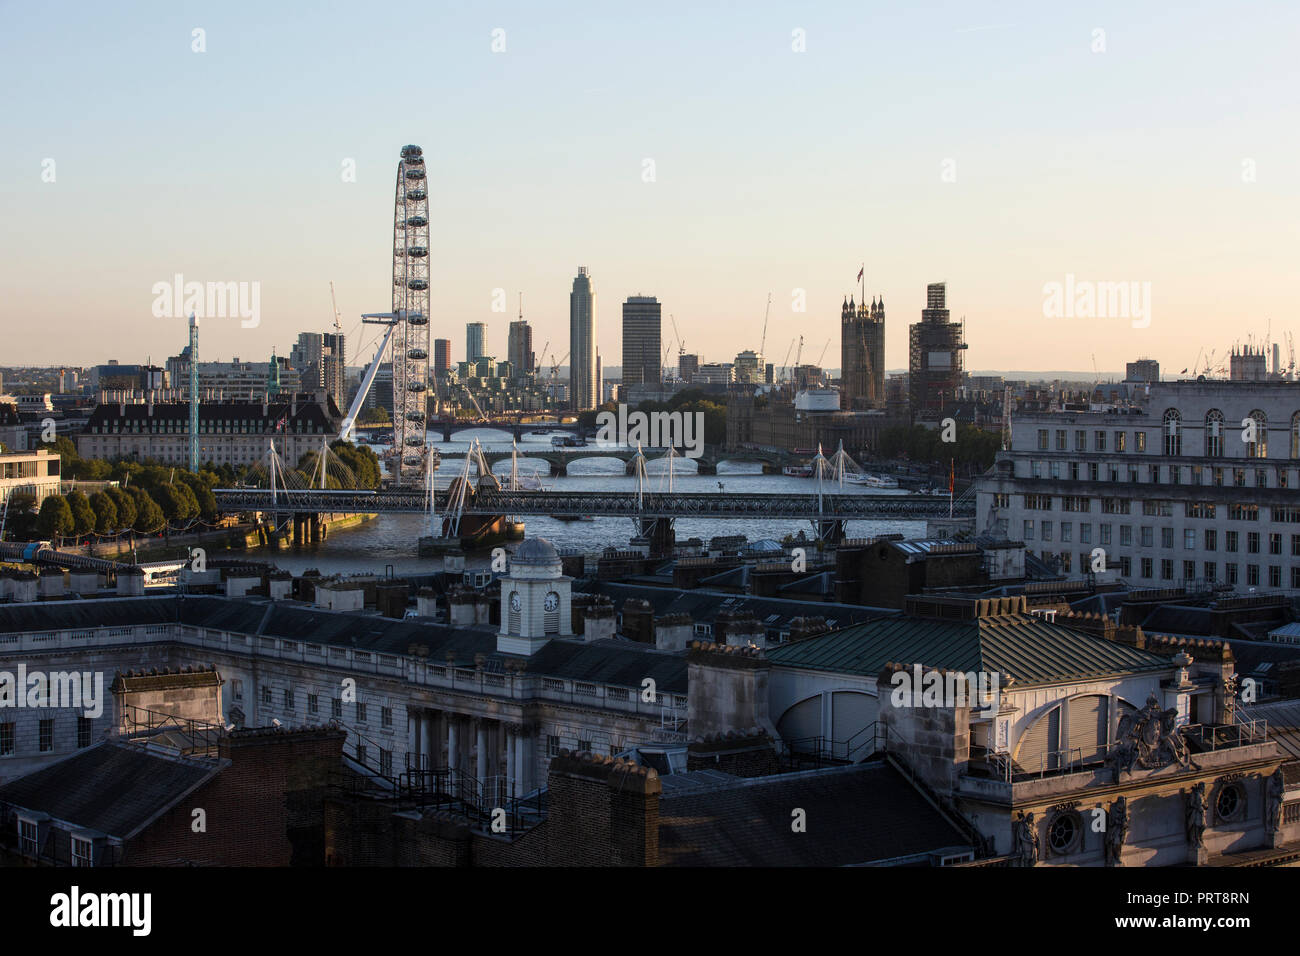 London skyline looking west along the River Thames from an elevated position, London, UK Stock Photo